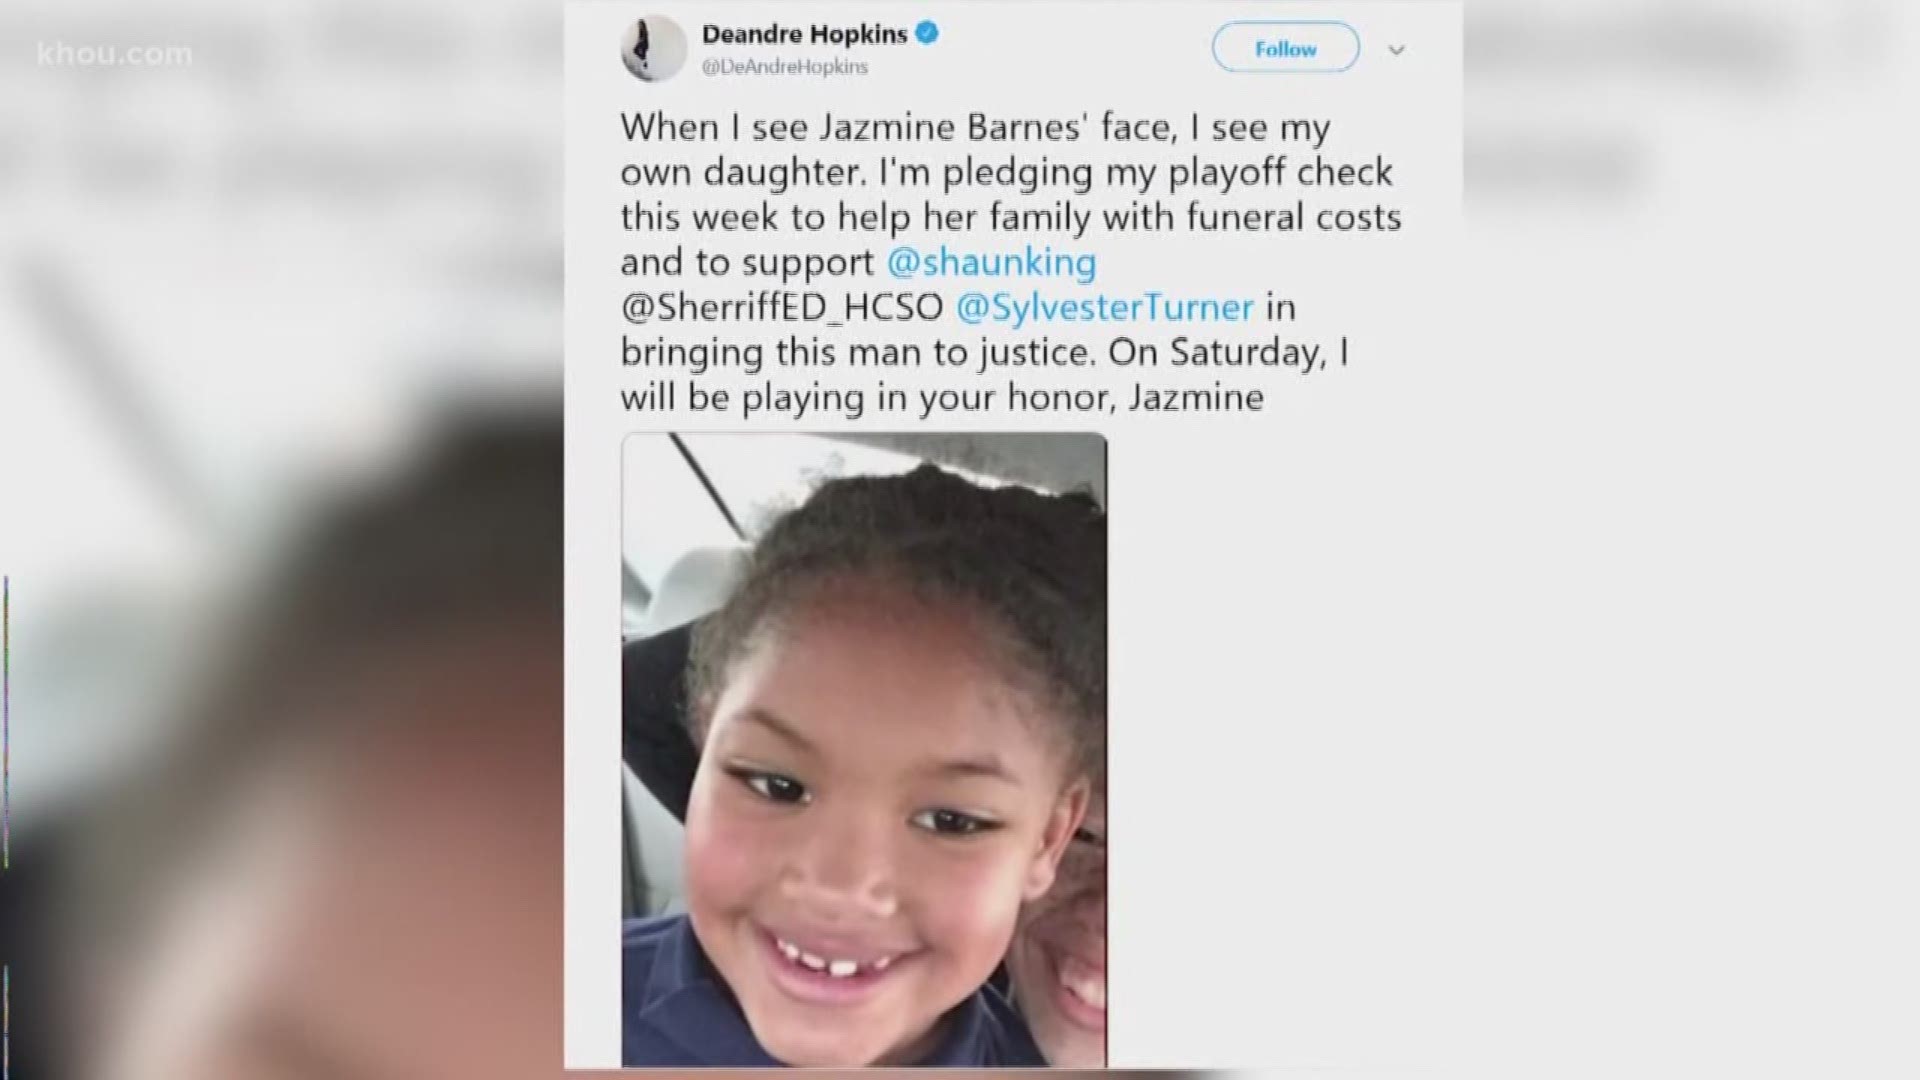 Houston Texans wide receiver DeAndre Hopkins says he will donate his football playoff check to the family of Jazmine Barnes.